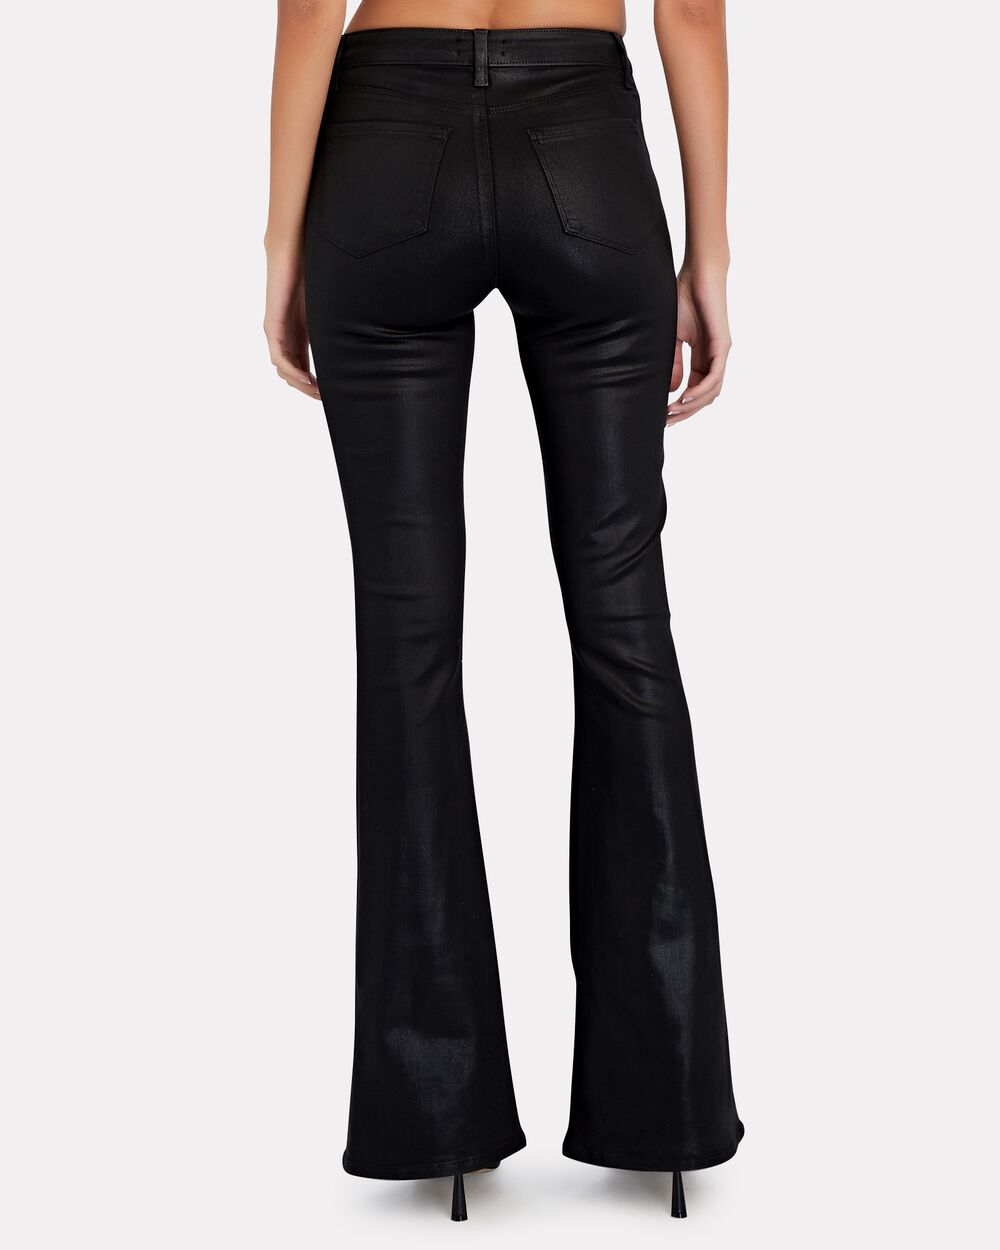 L'Agence Marty Coated High-Rise Flared Jeans